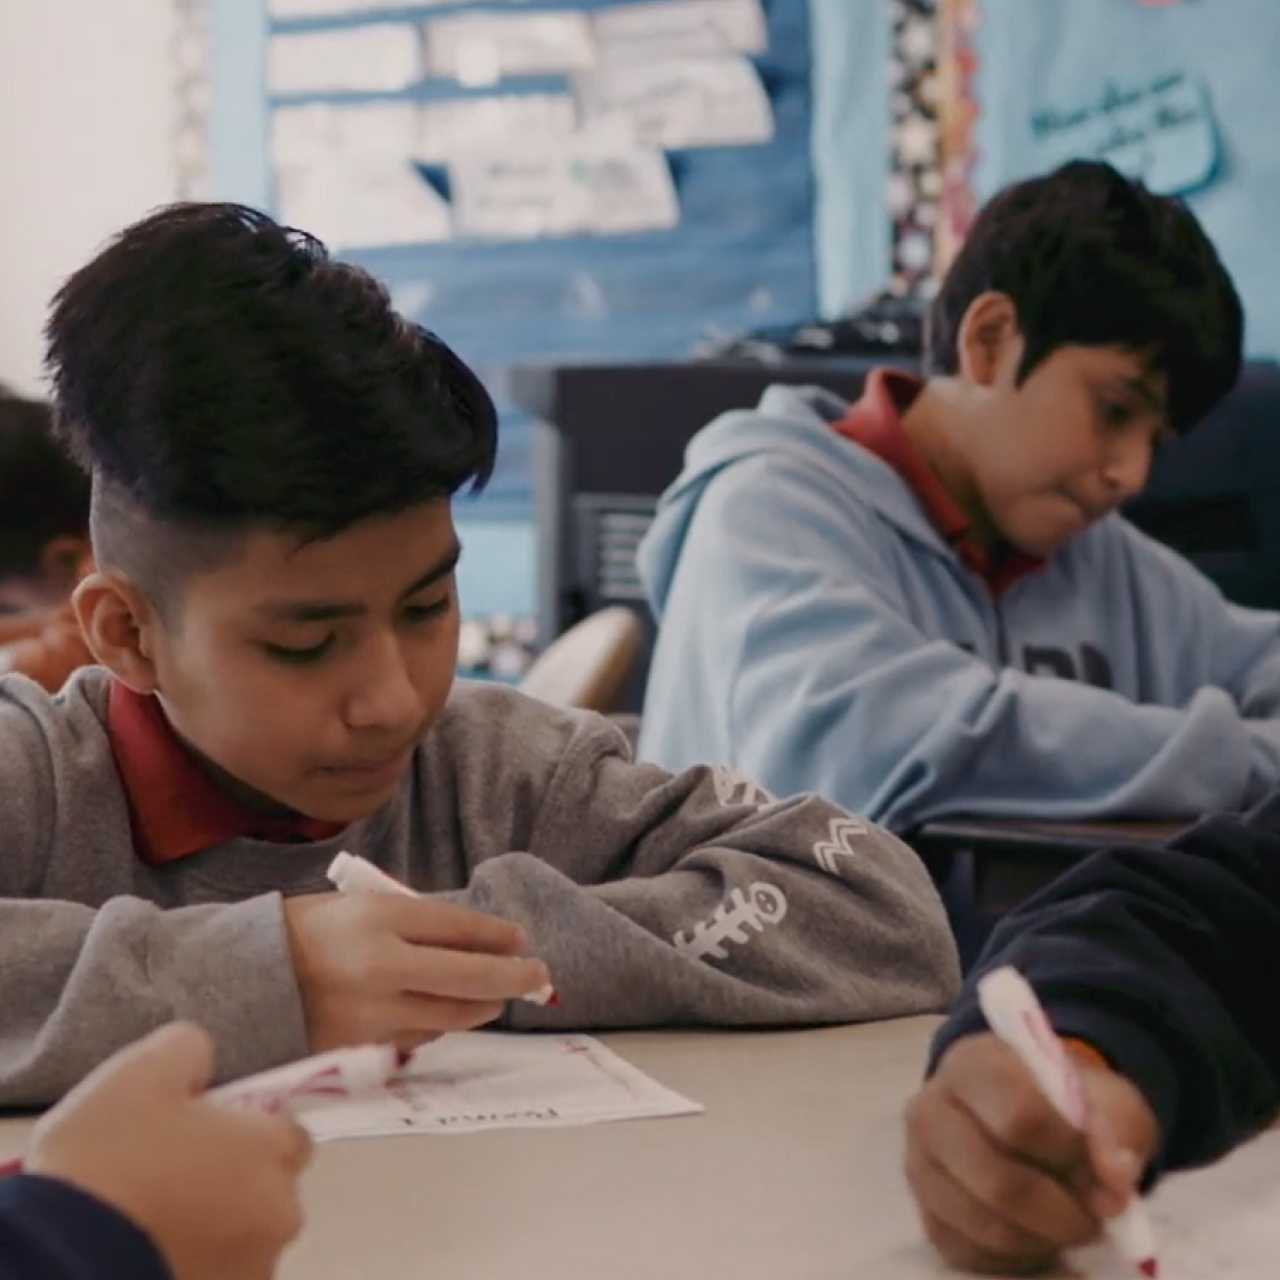 Two boys in an elementary school classroom sitting at desks while writing on paper with markers